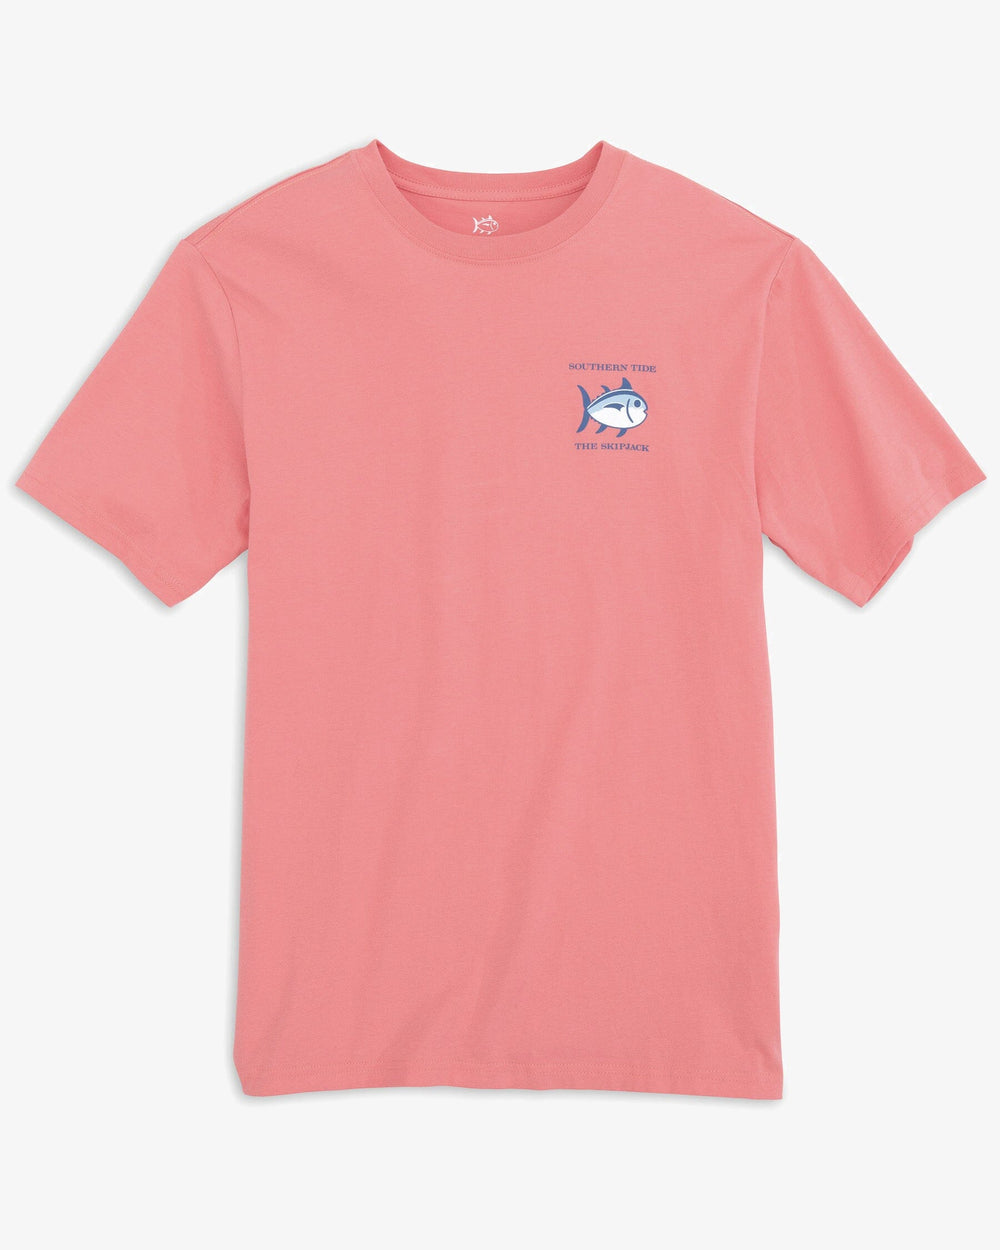 The front view of the Southern Tide Original Skipjack Short Sleeve T-Shirt by Southern Tide - Flamingo Pink